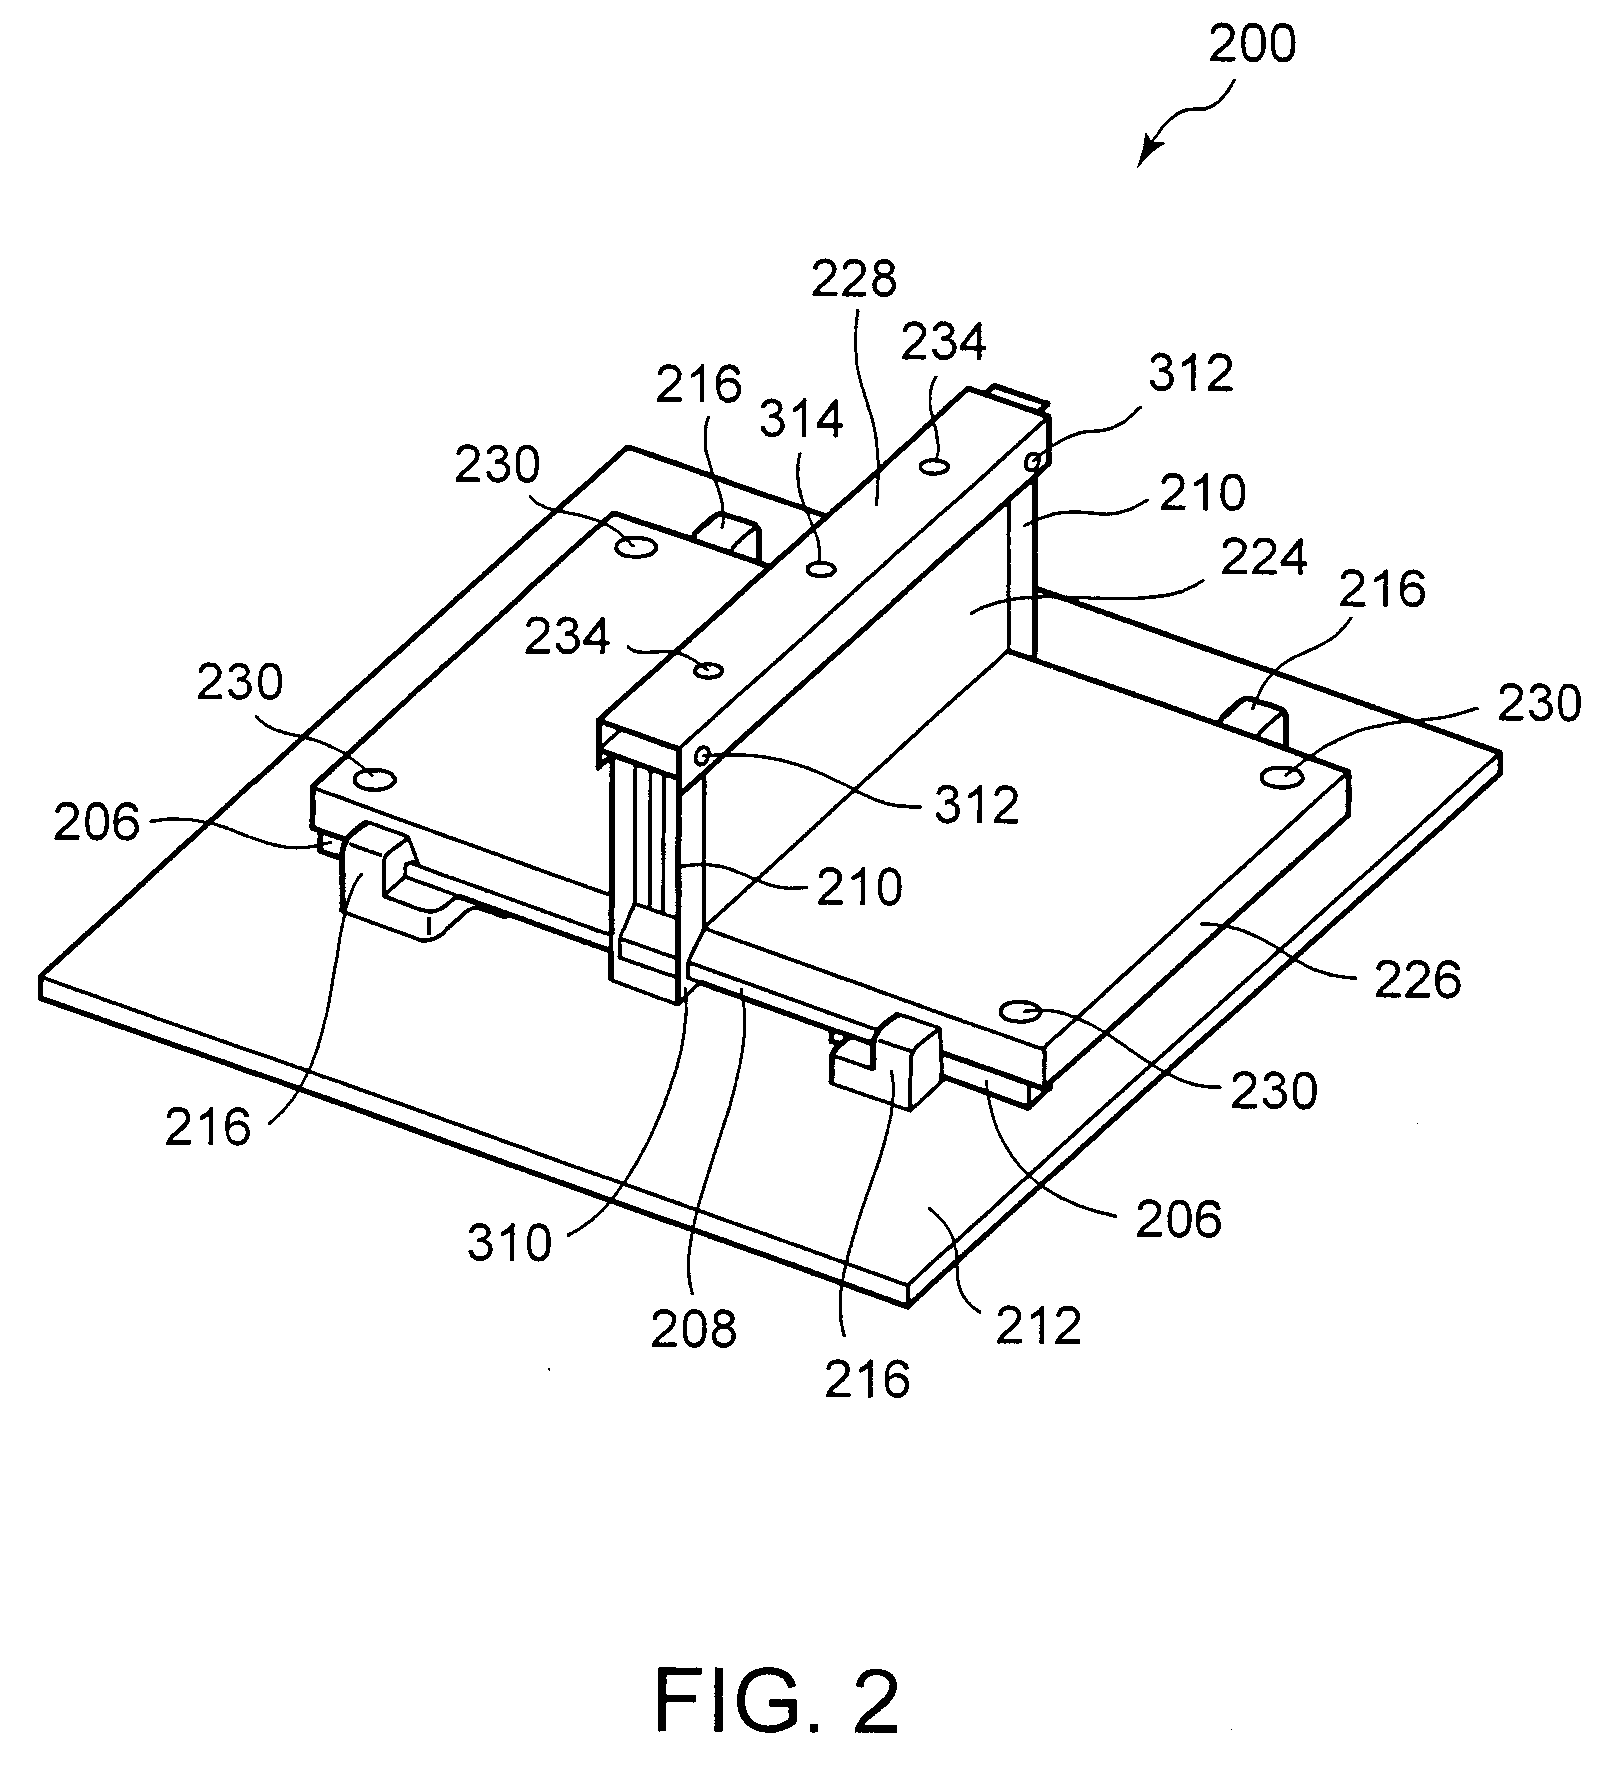 Non-Influencing Fastener for Mounting a Heat Sink in Contact with an Electronic Component